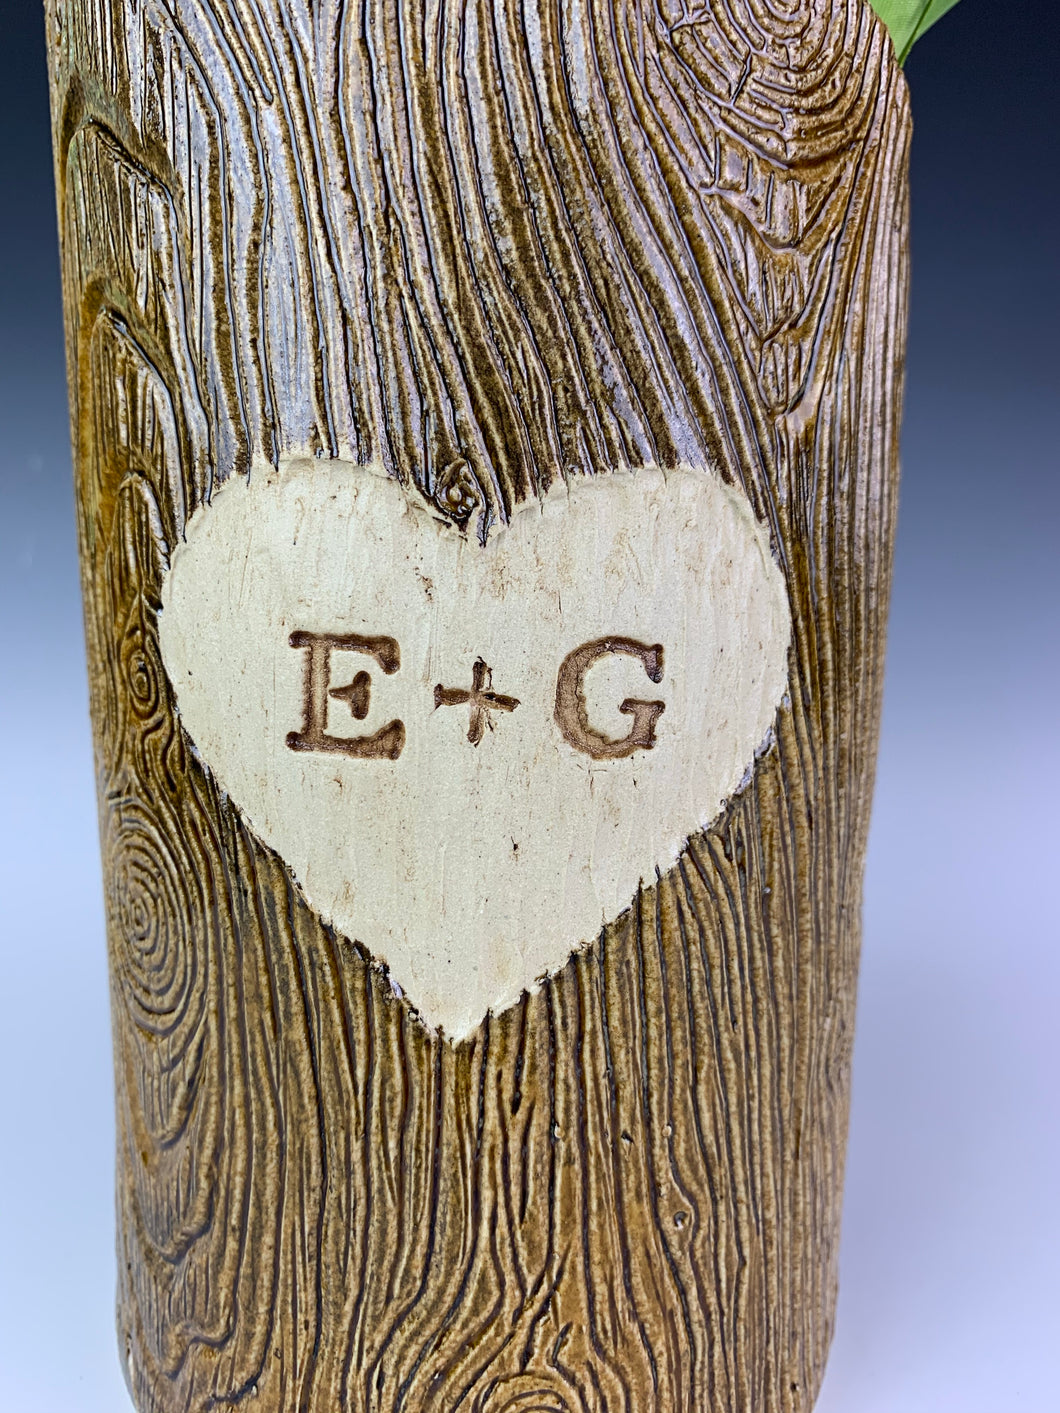 close up detail texture shot of a woodgrain, lumberjack vase. the vase has a heart and initials carved into the wood-like surface